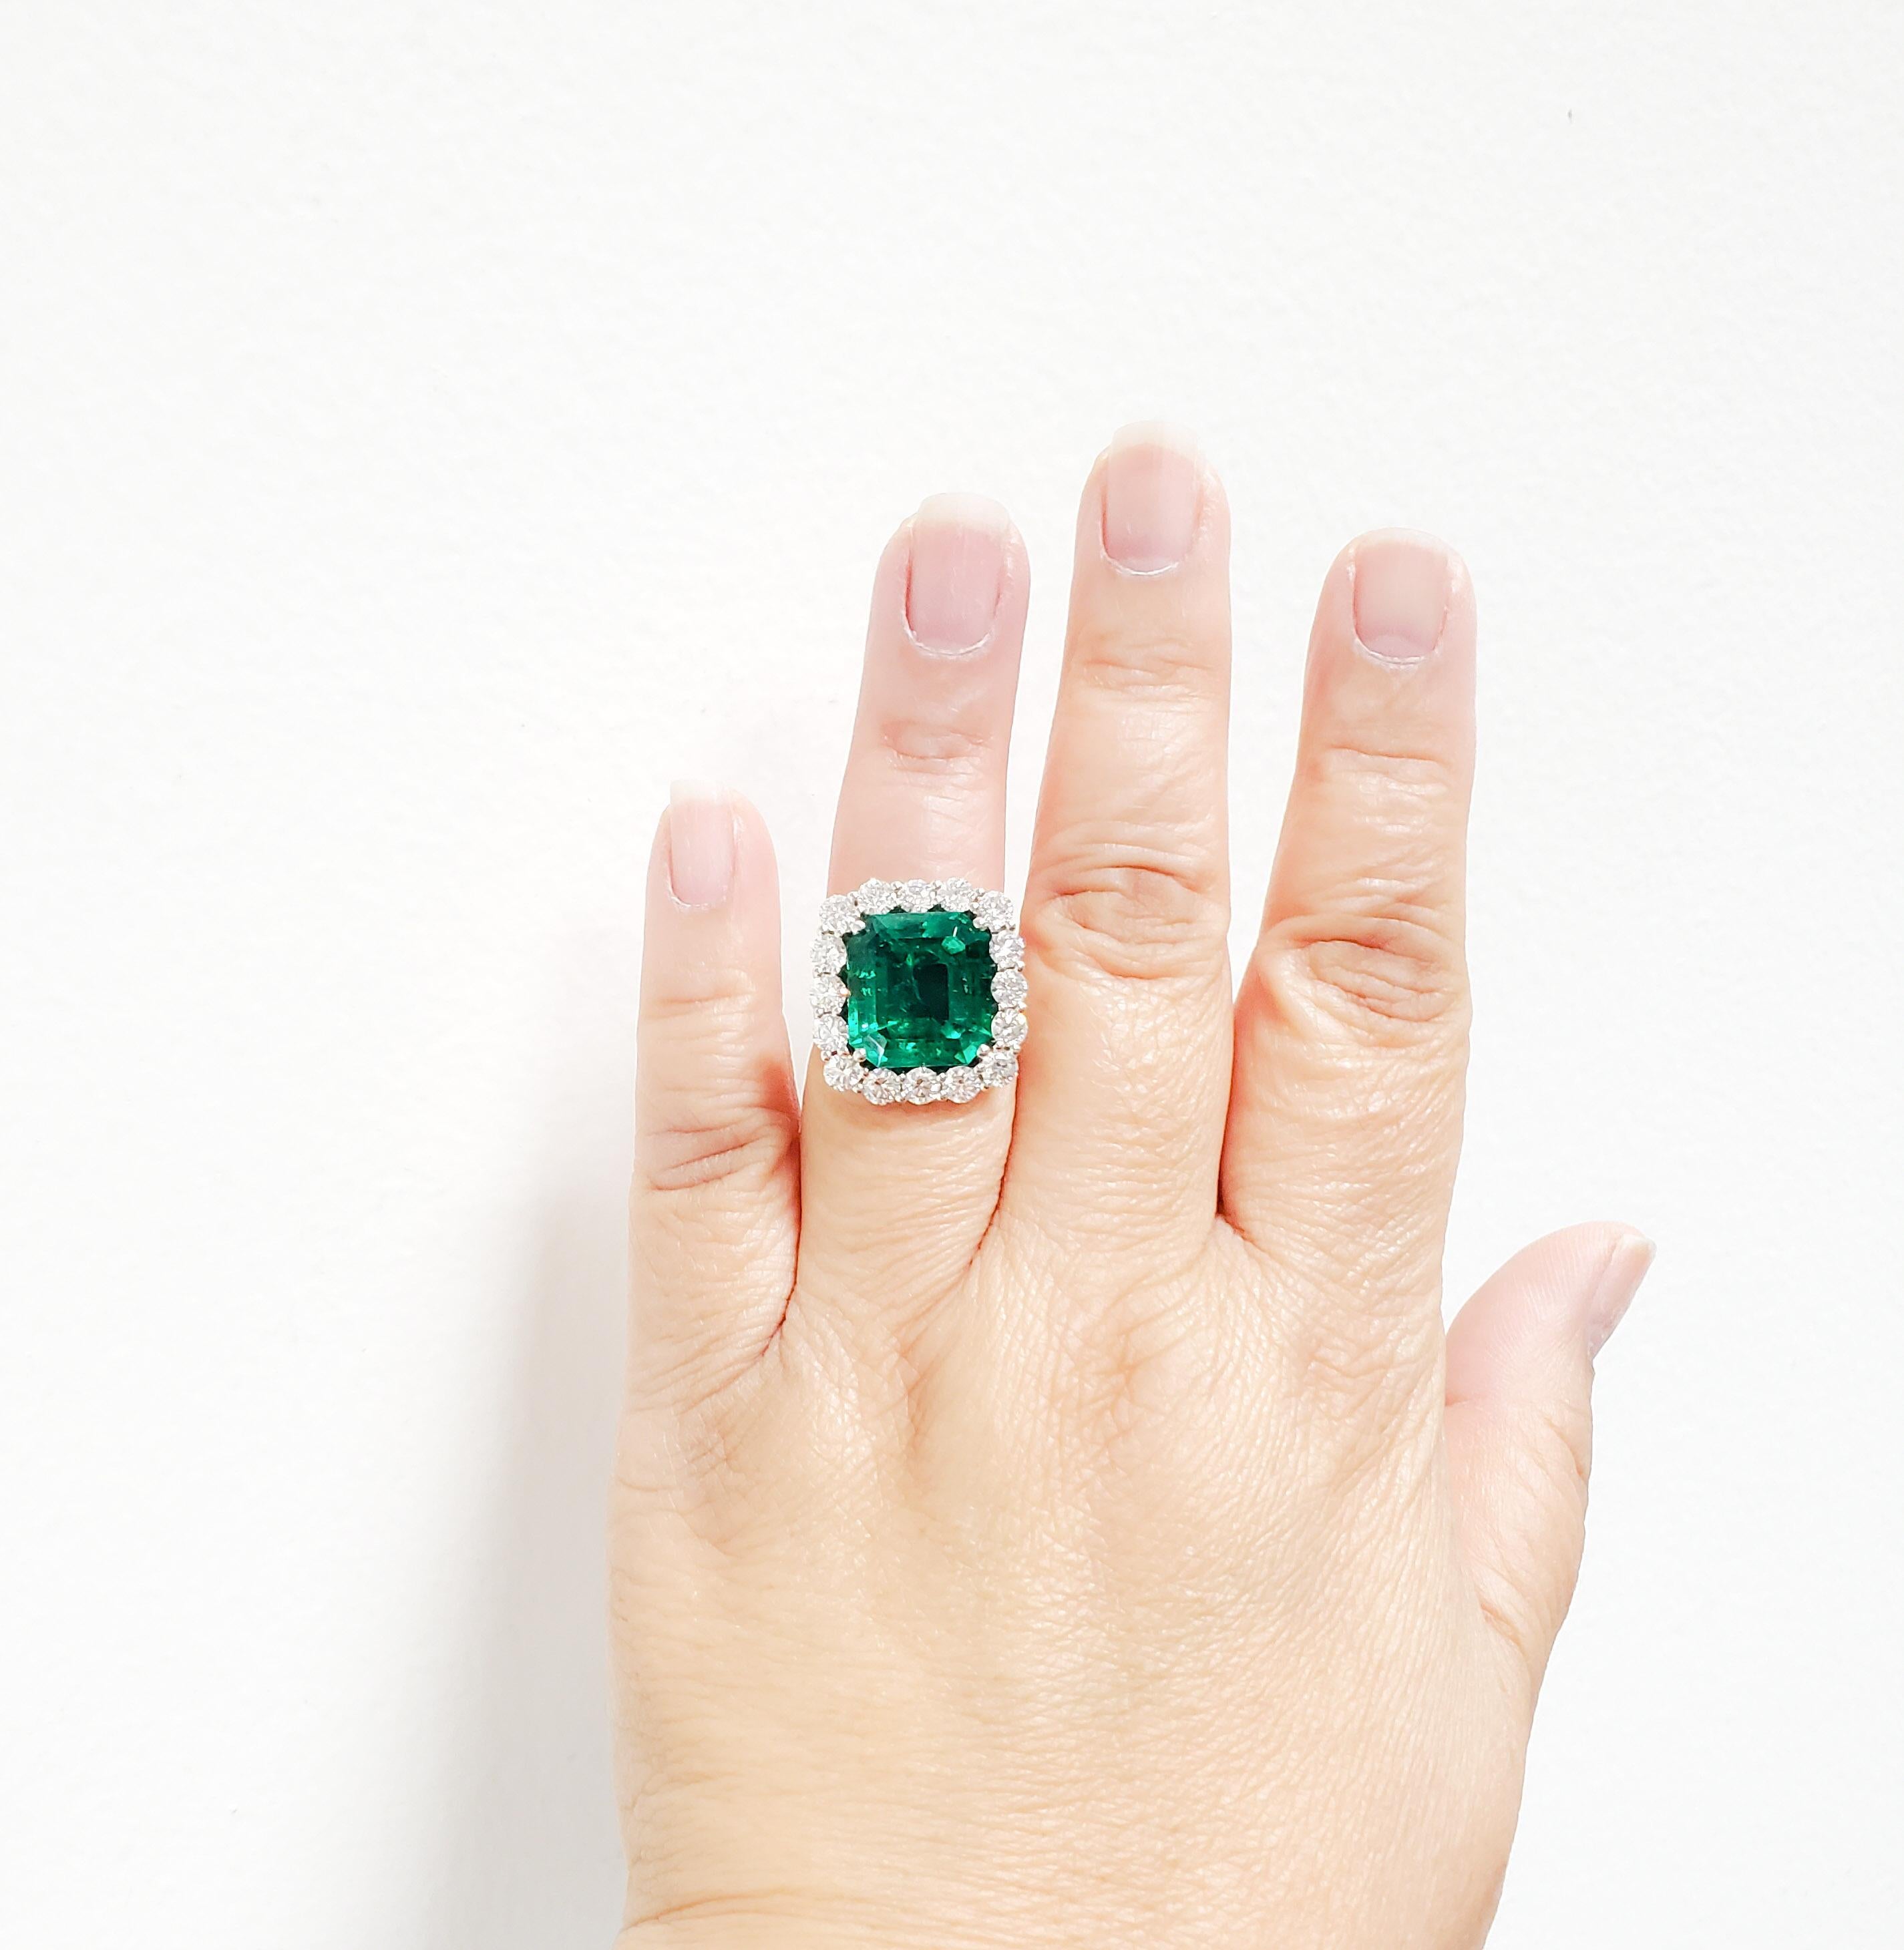 Absolutely stunning natural 11.02 ct. Colombian emerald emerald cut with 2.59 ct. excellent quality white diamond rounds.  Handmade in platinum.  Ring size 6.25.  AGL certificate included.